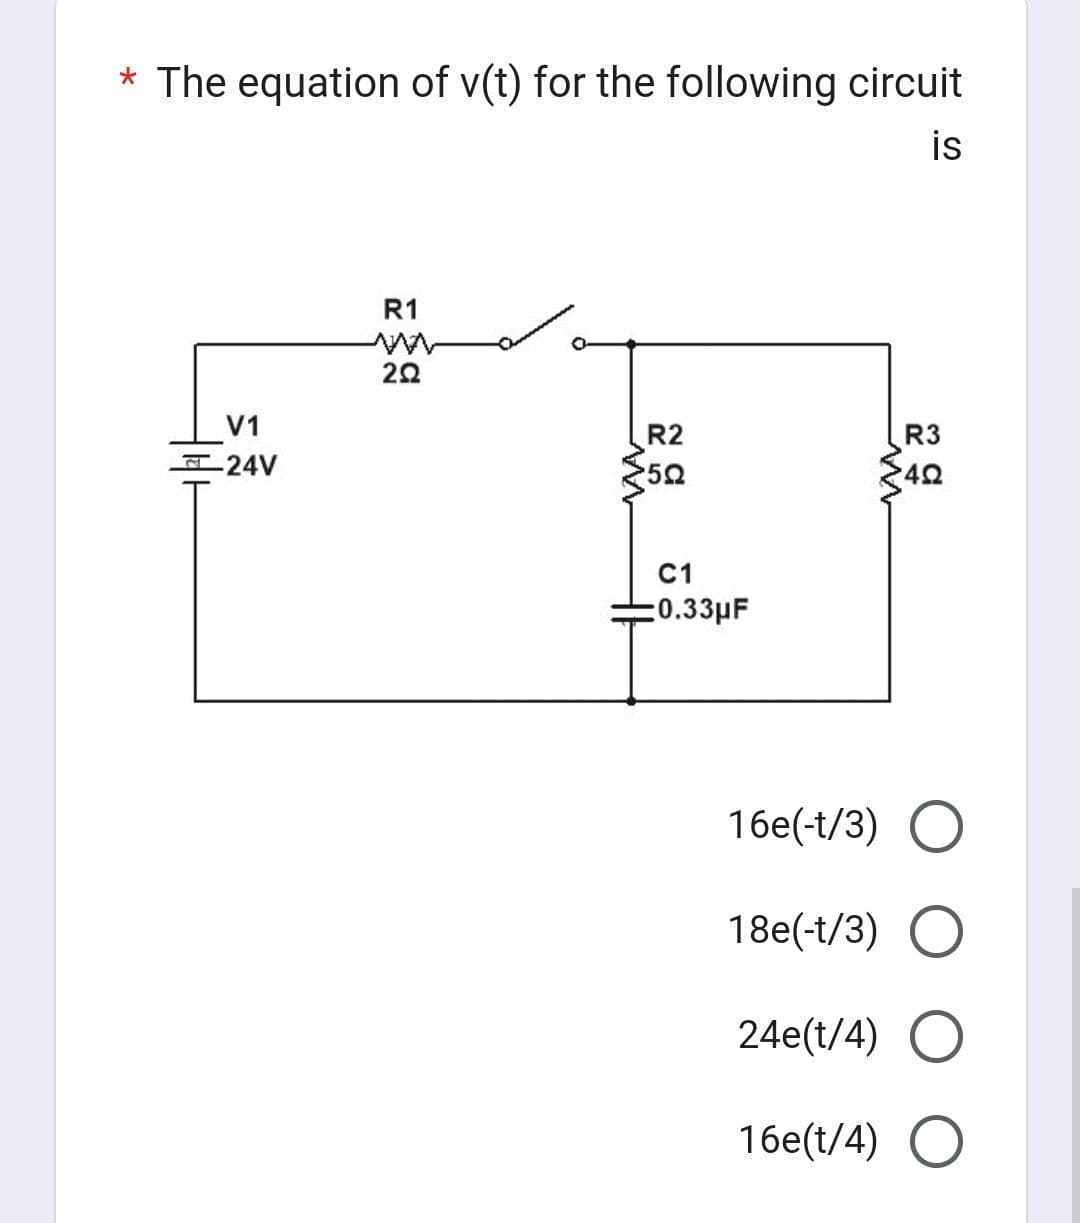 * The equation of v(t) for the following circuit
is
V1
24V
R1
M
292
W
R2
50
C1
0.33μF
R3
*42
16e(-t/3) O
18e(-t/3) O
24e(t/4) O
16e(t/4) O